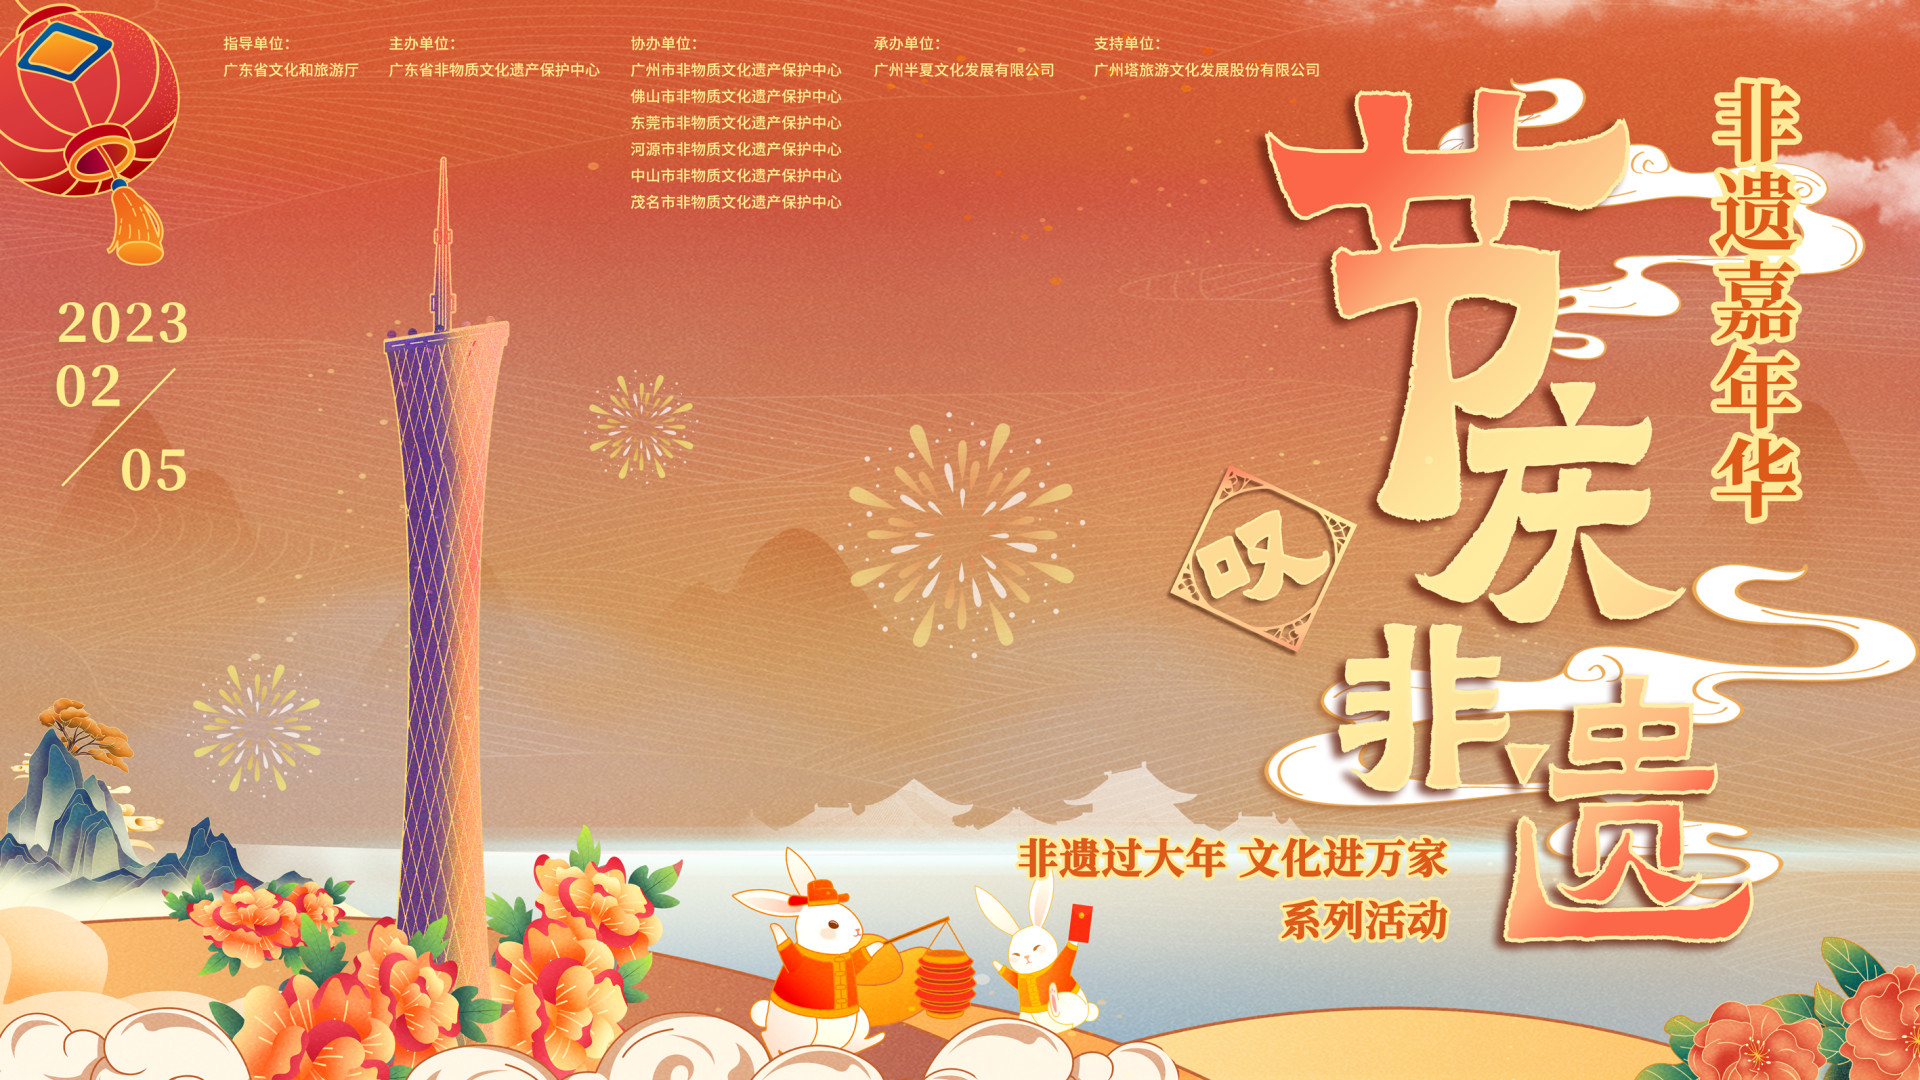 Lantern Festival activity featuring intangible cultural heritage to be held at Canton Tower